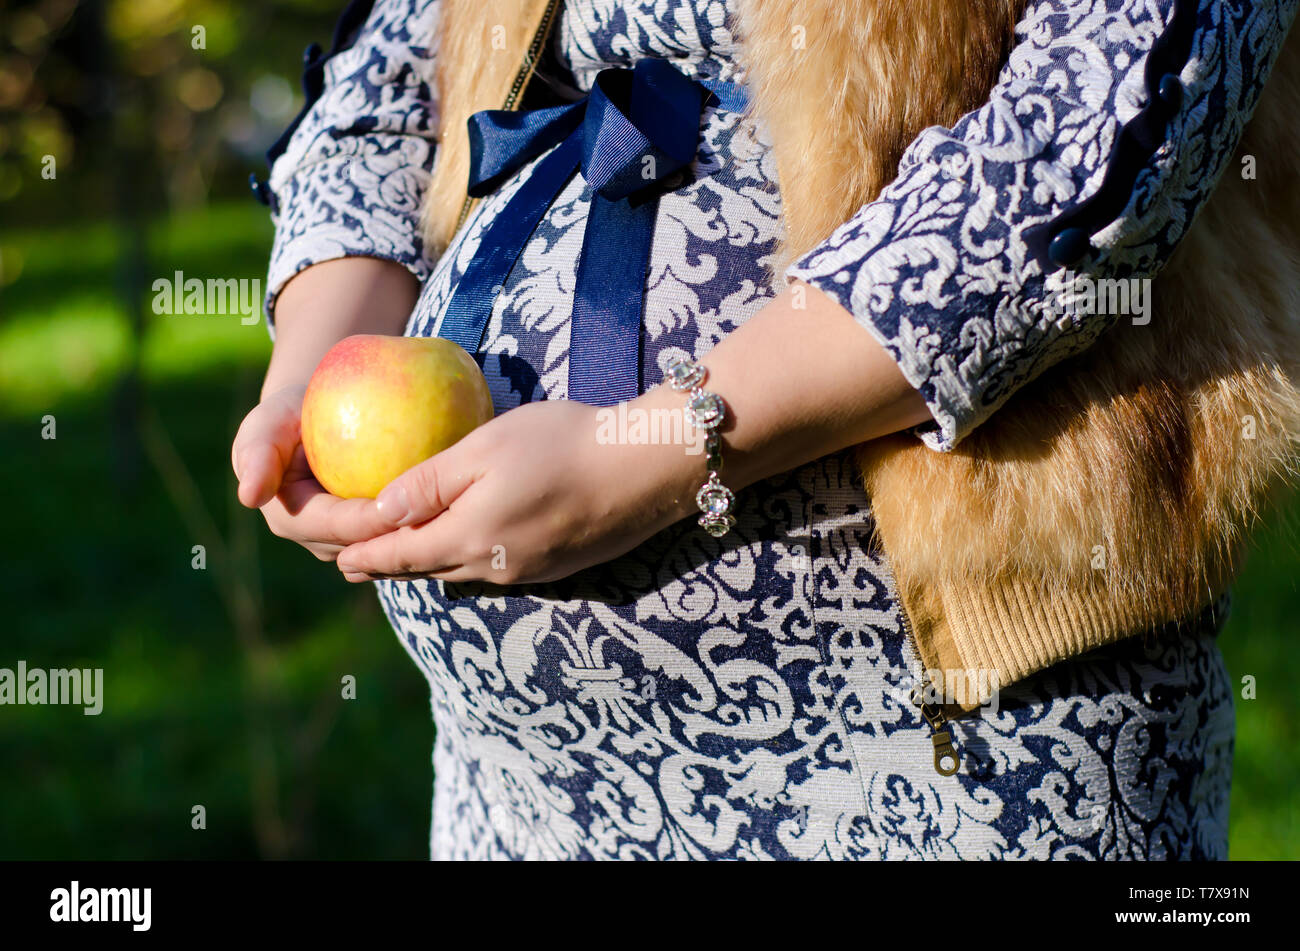 pregnant woman in blue dress holds a round yellow apple Stock Photo